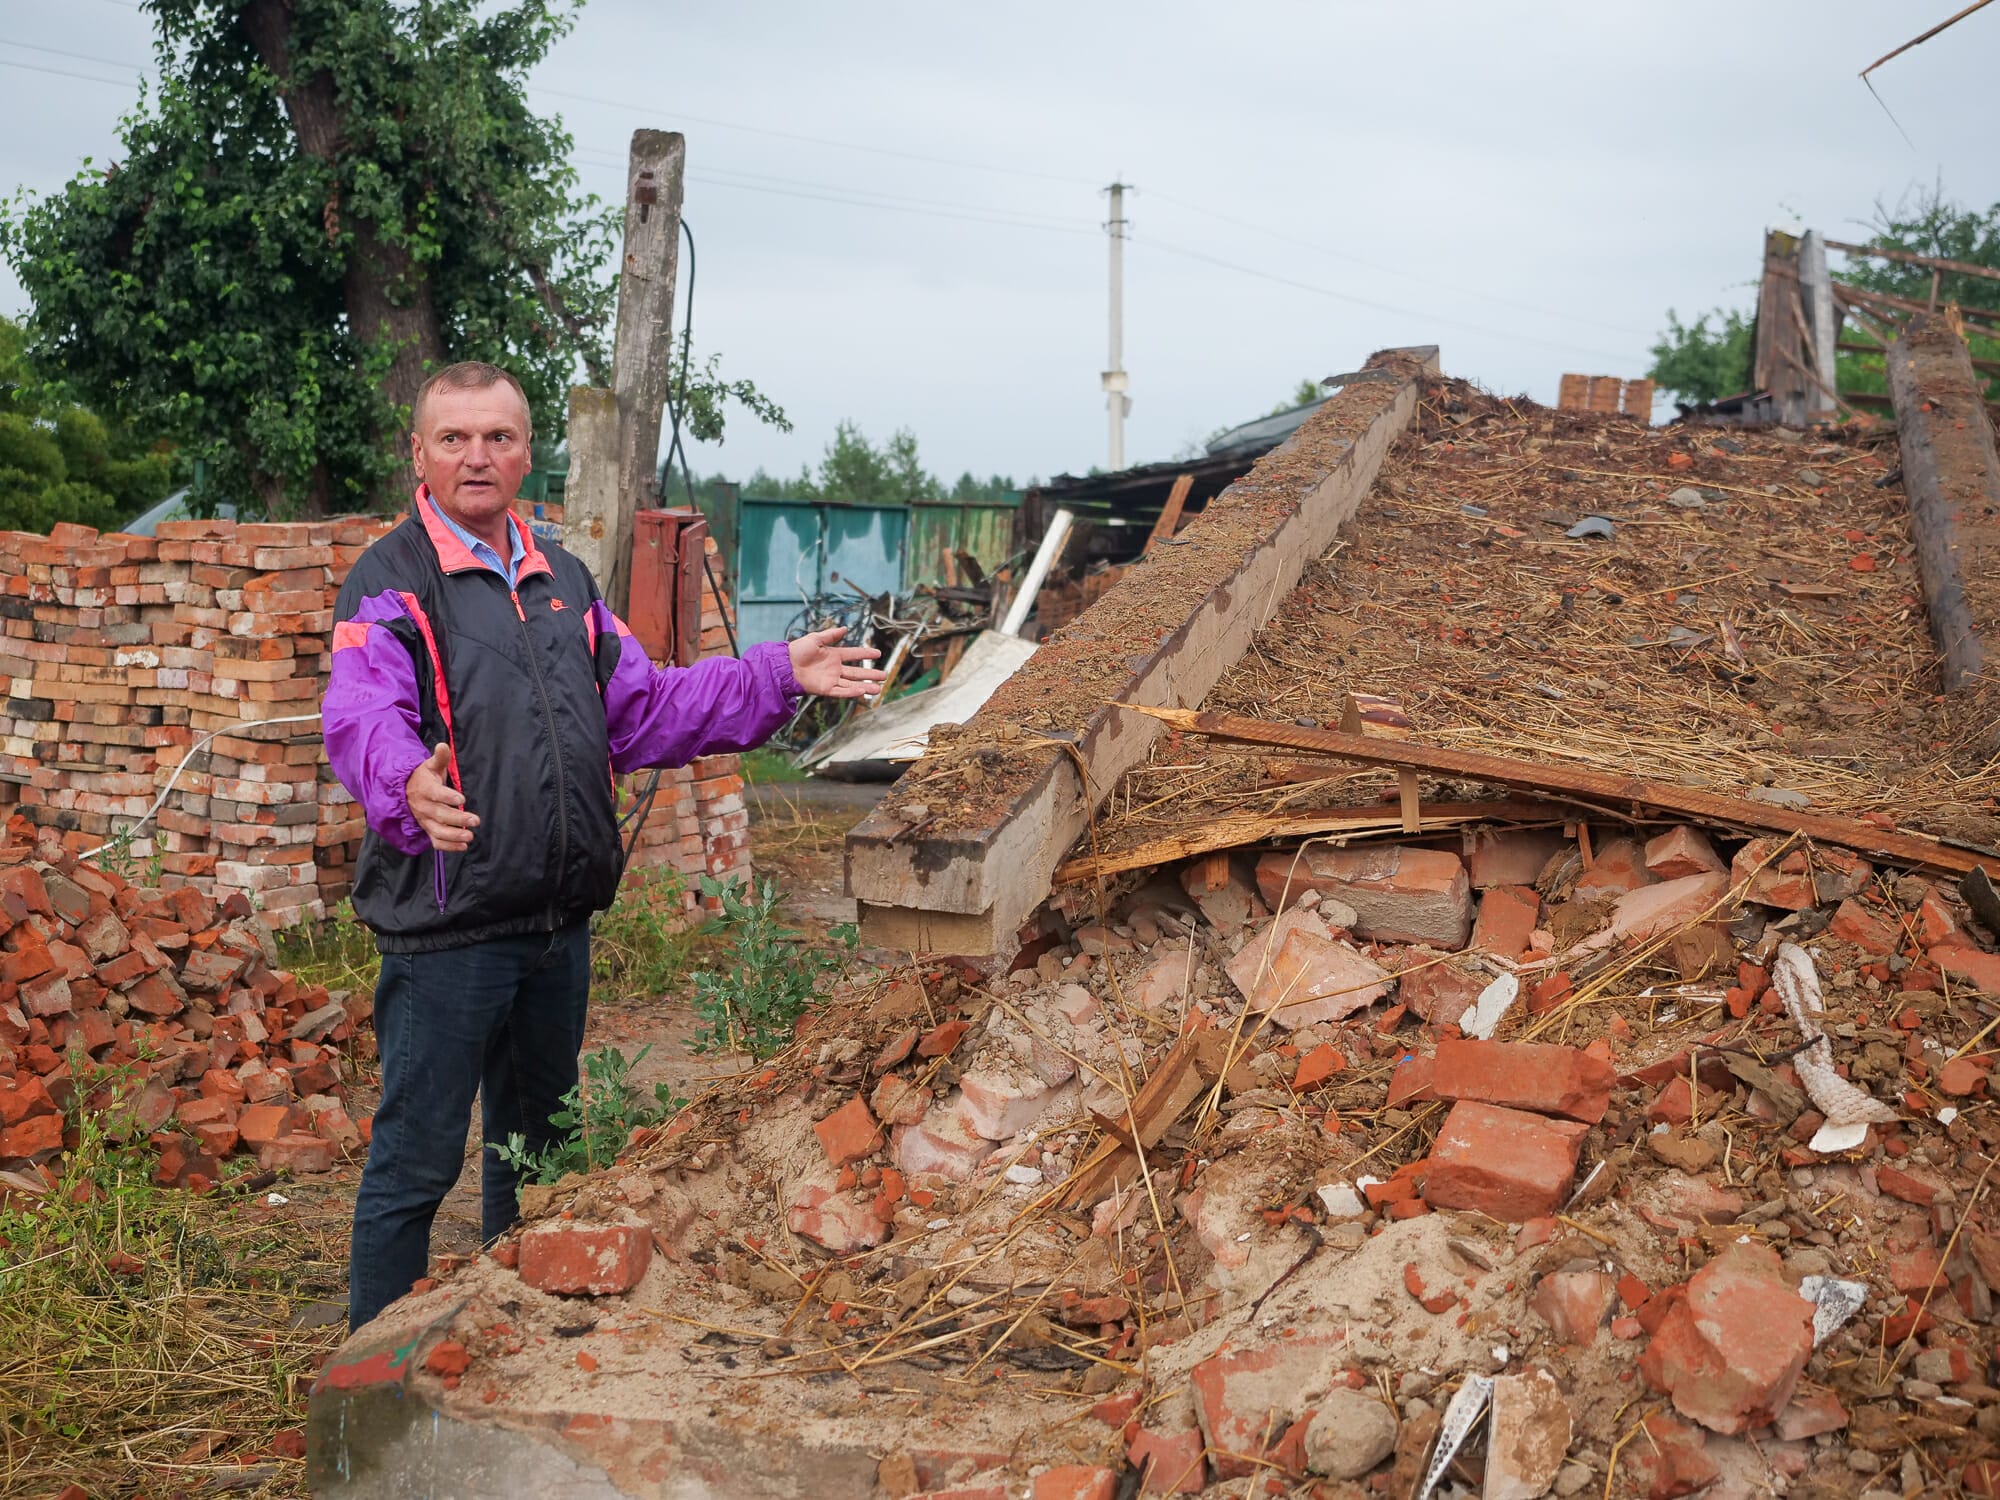 Serhiy Kolevych (47) stands in front of the ruins of his house. During the first air raid on March 14, he was in the building with his wife, niece and nephew and was injured. During the second attack, which completely destroyed the house, he was already staying with neighbors.